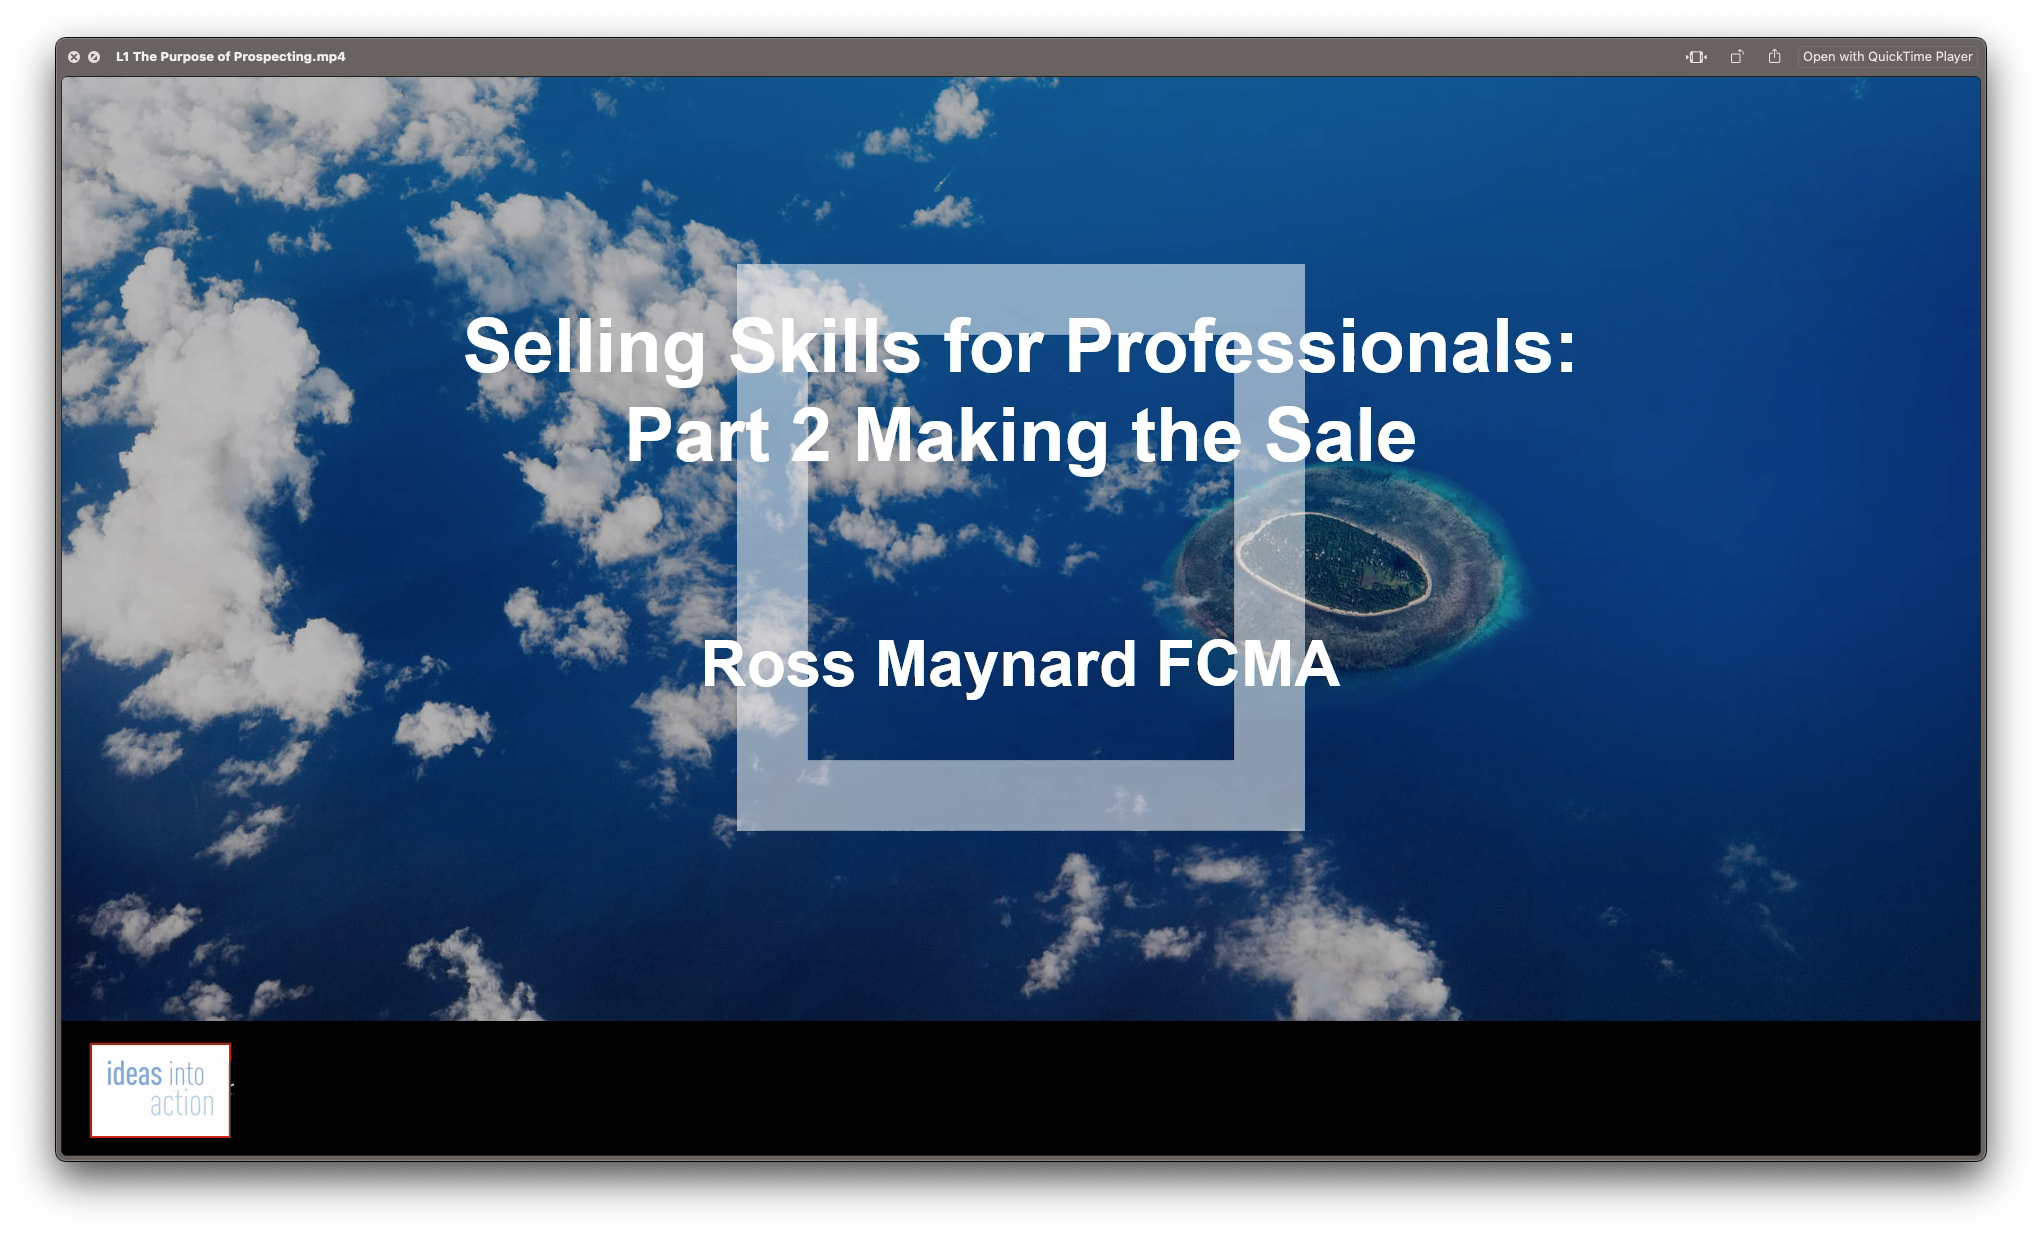 Selling Skills for Professionals: Part 2 - Making the Sale